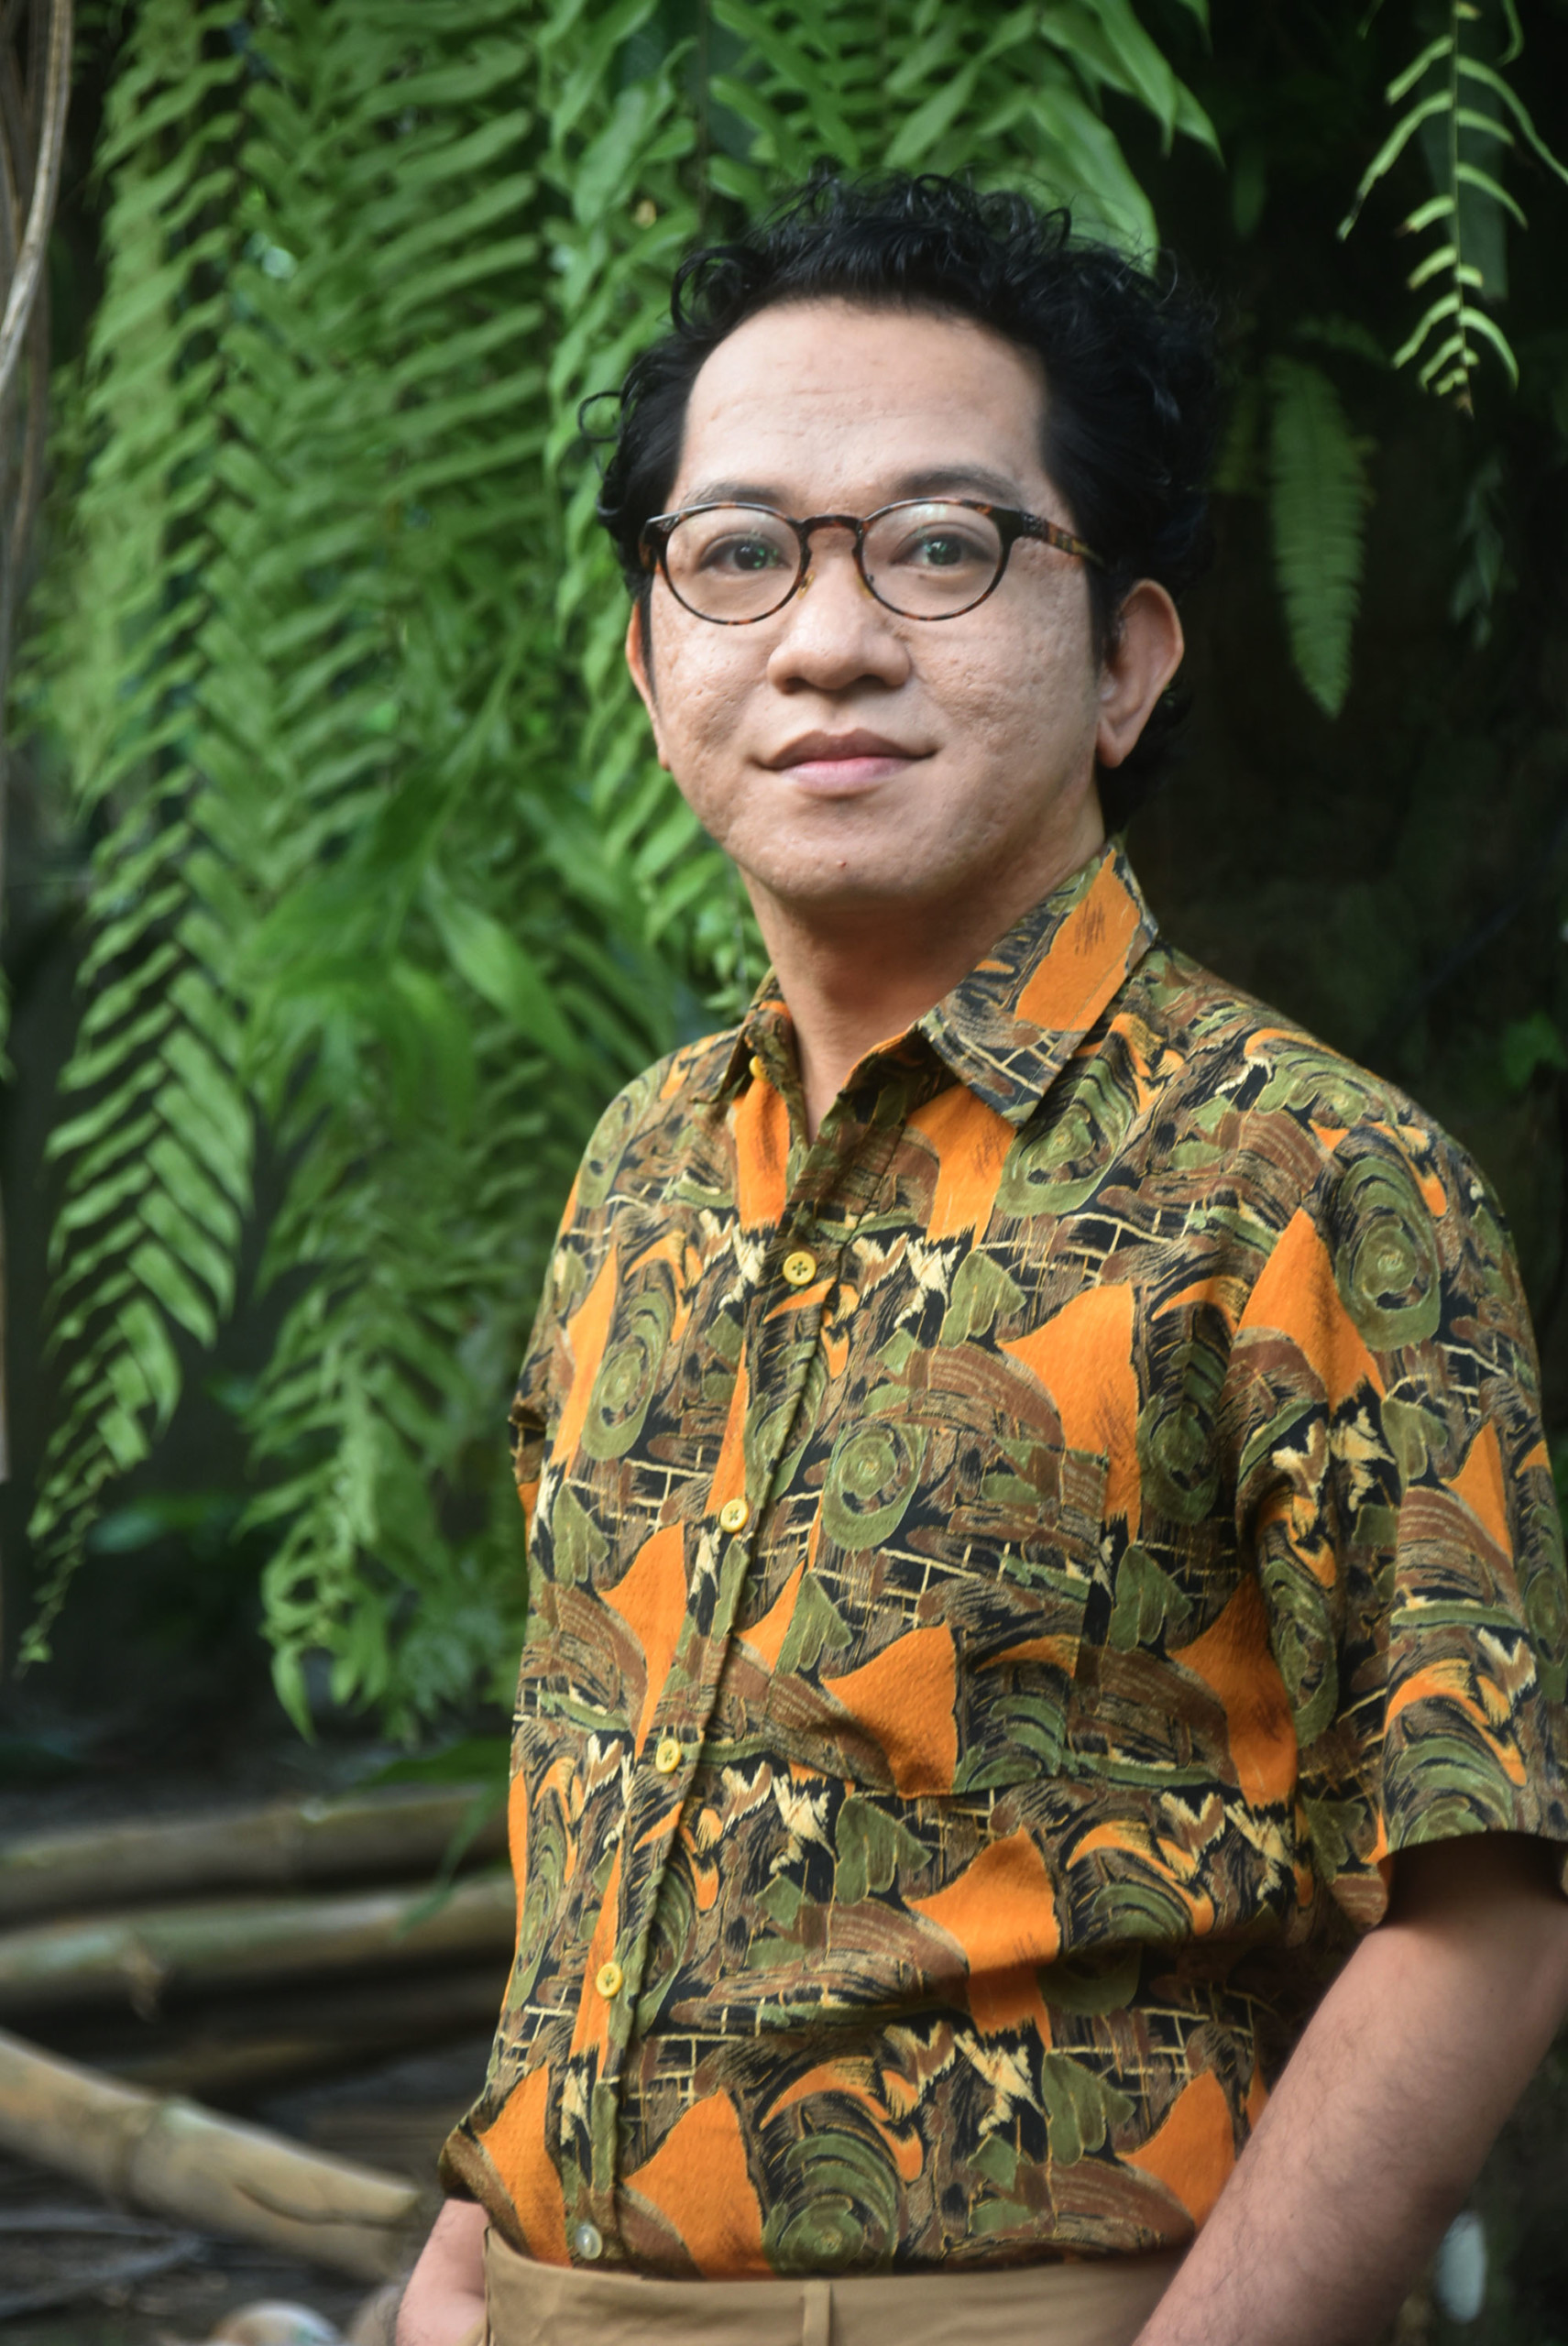 A person with short dark hair and glasses standing in front of a tree, wearing a colourful shirt.